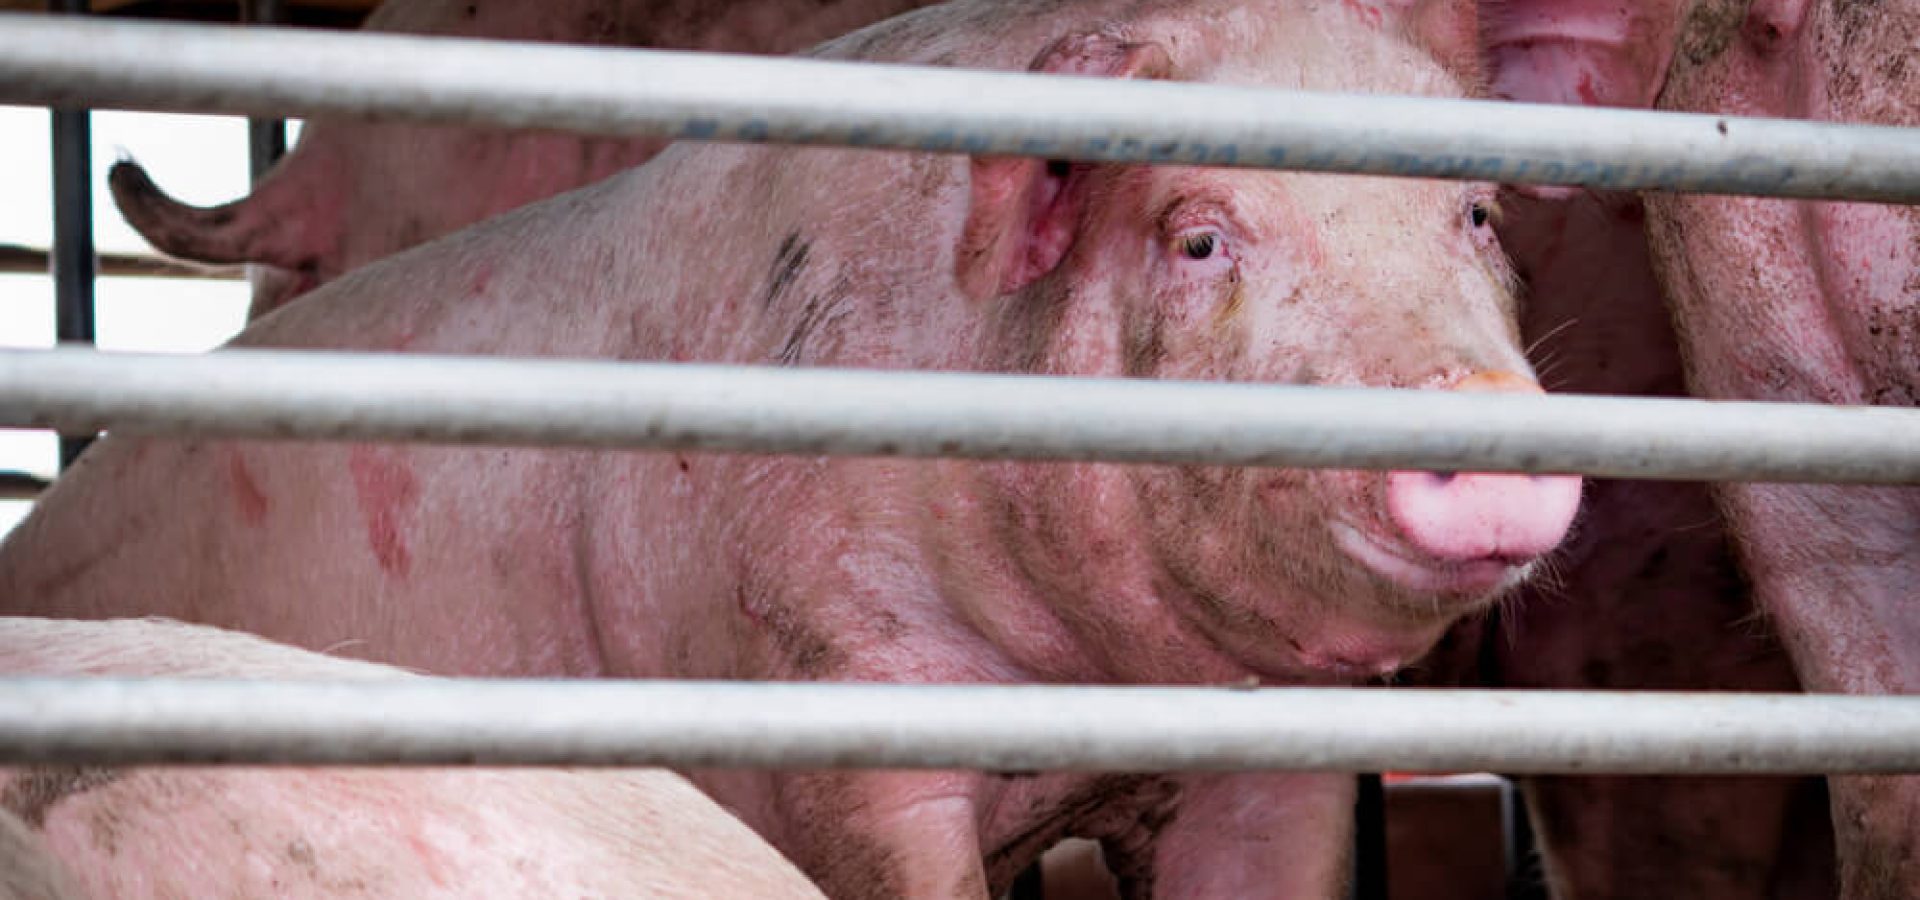 Wibest Broker — African: Pigs in truck transport from farm to slaughterhouse.